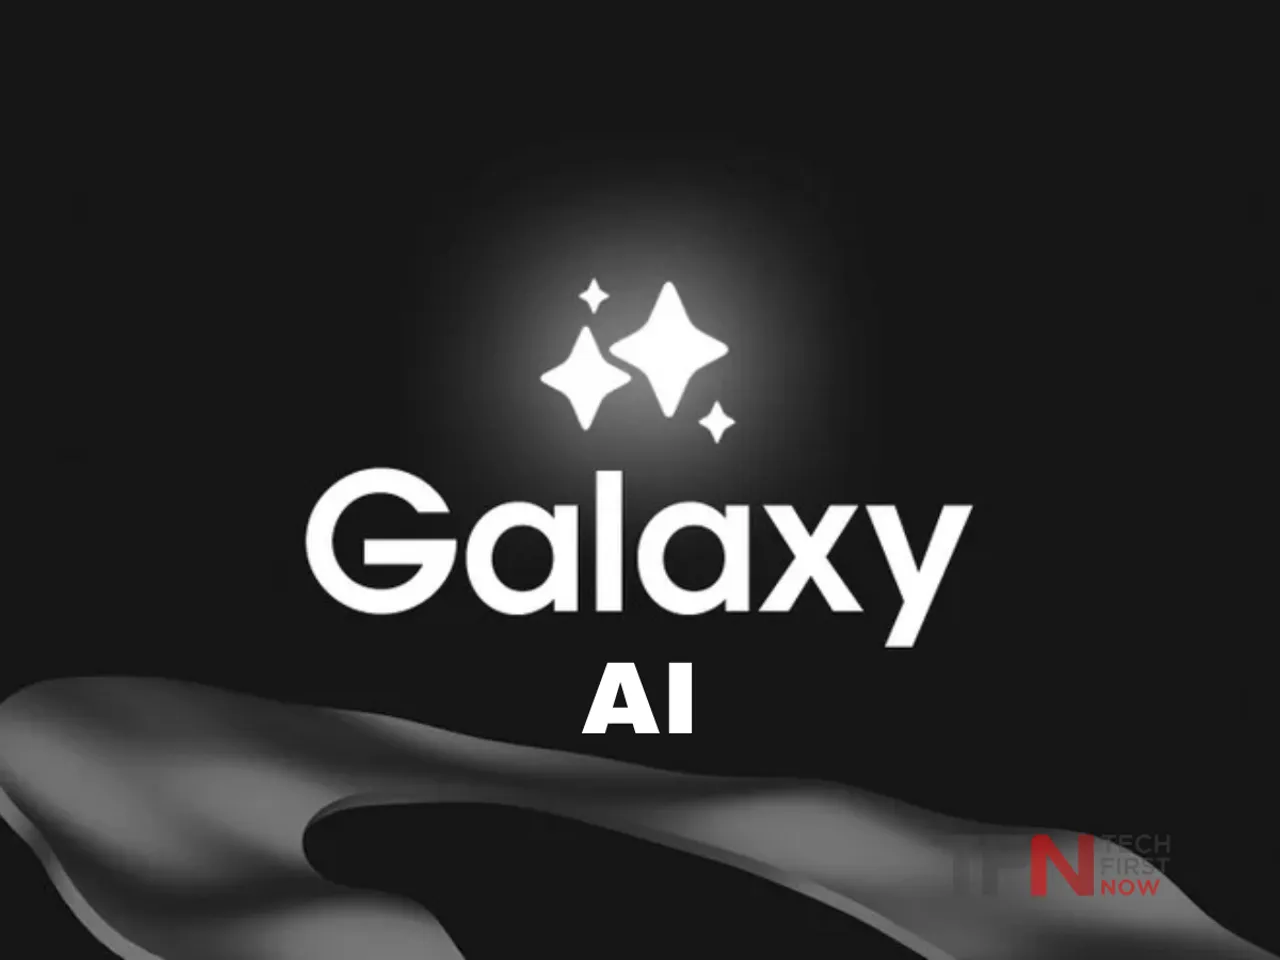 A New Era of Galaxy AI is Coming — Here's a Glimpse